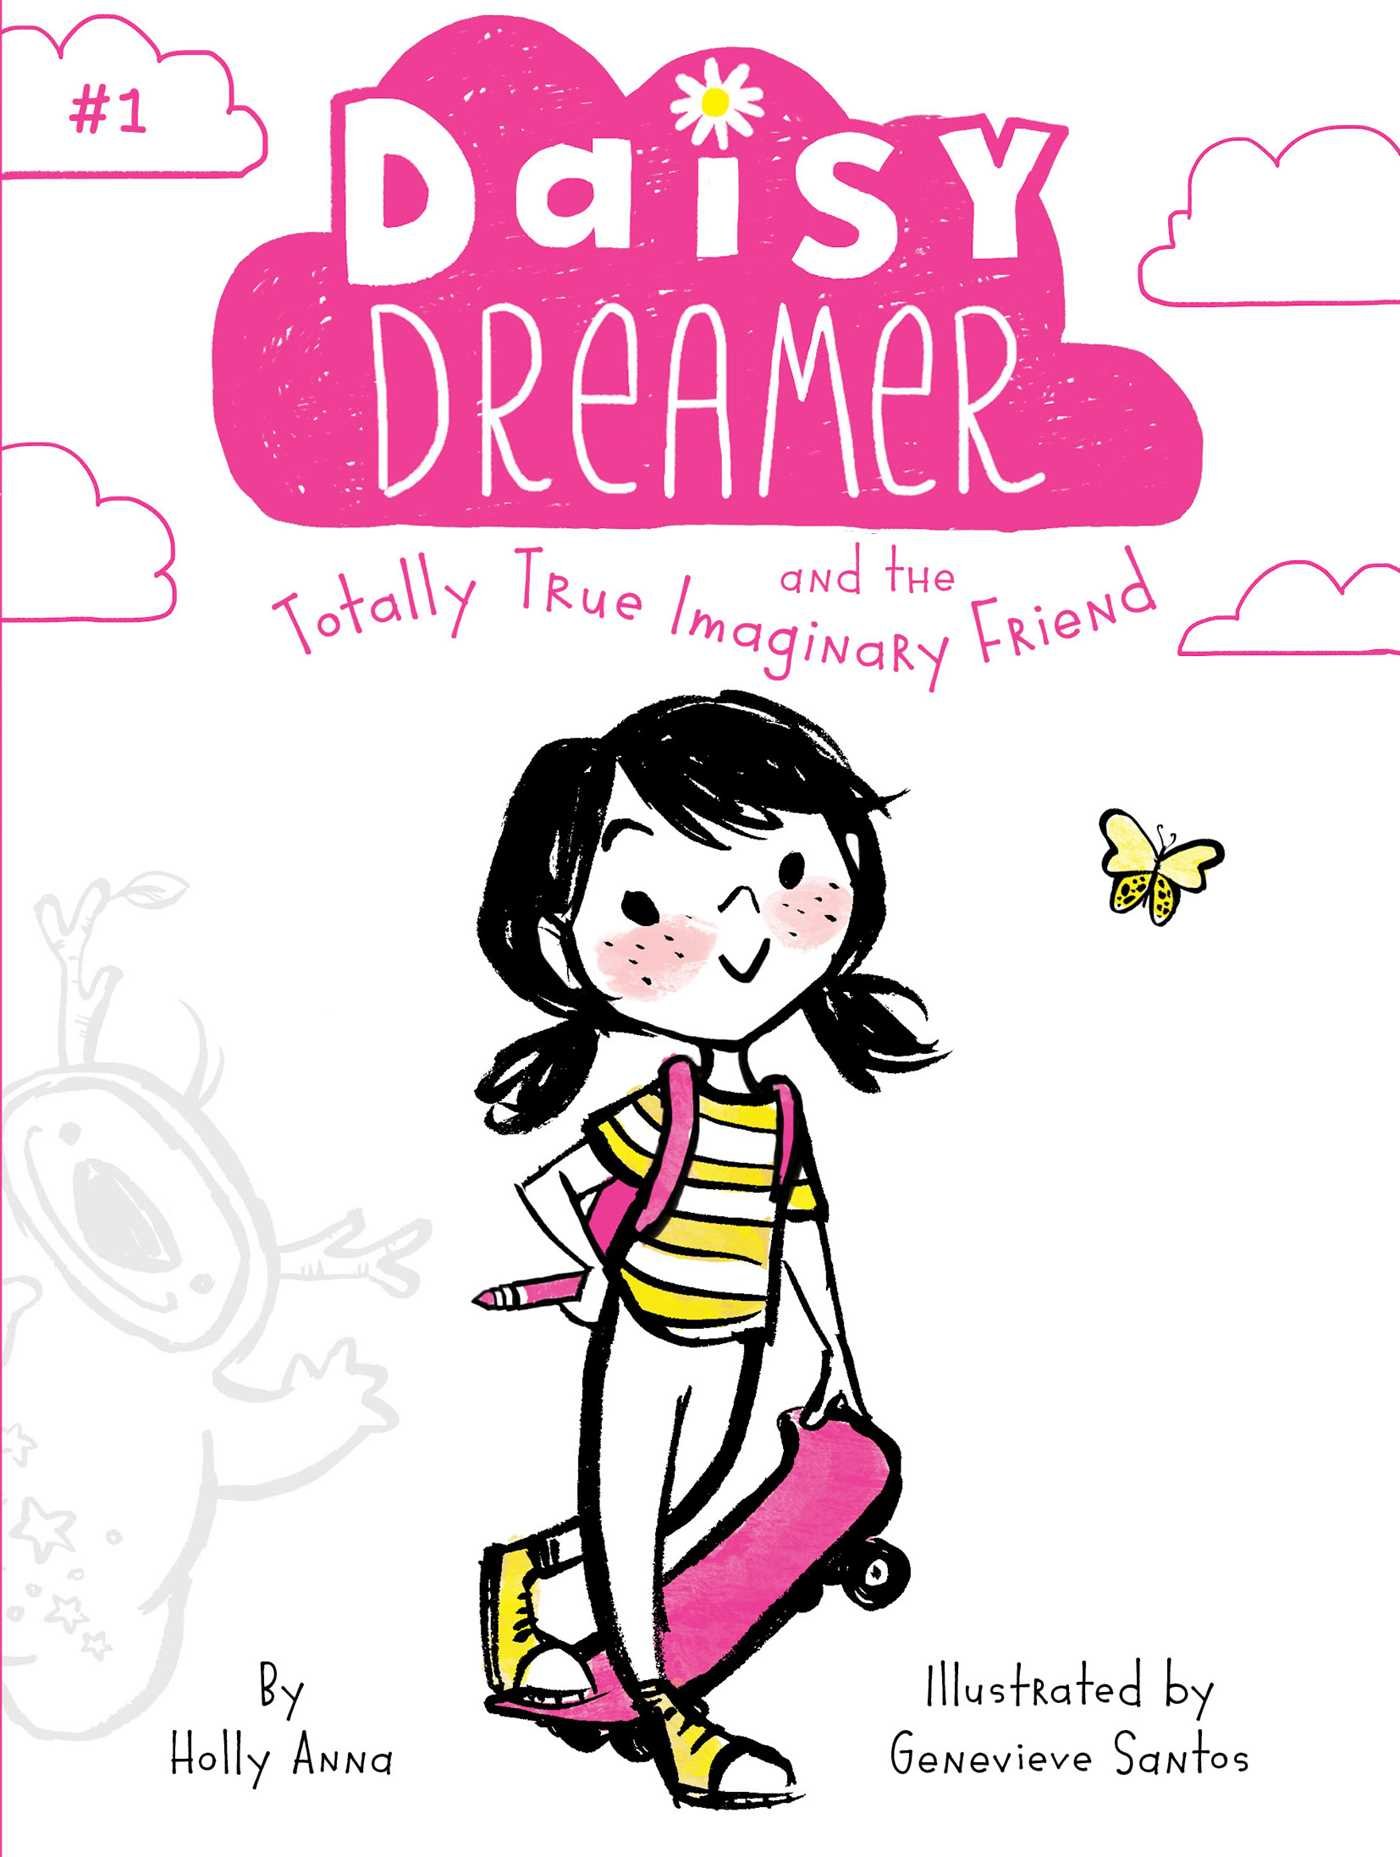 Image for "Daisy Dreamer and the Totally True Imaginary Friend"